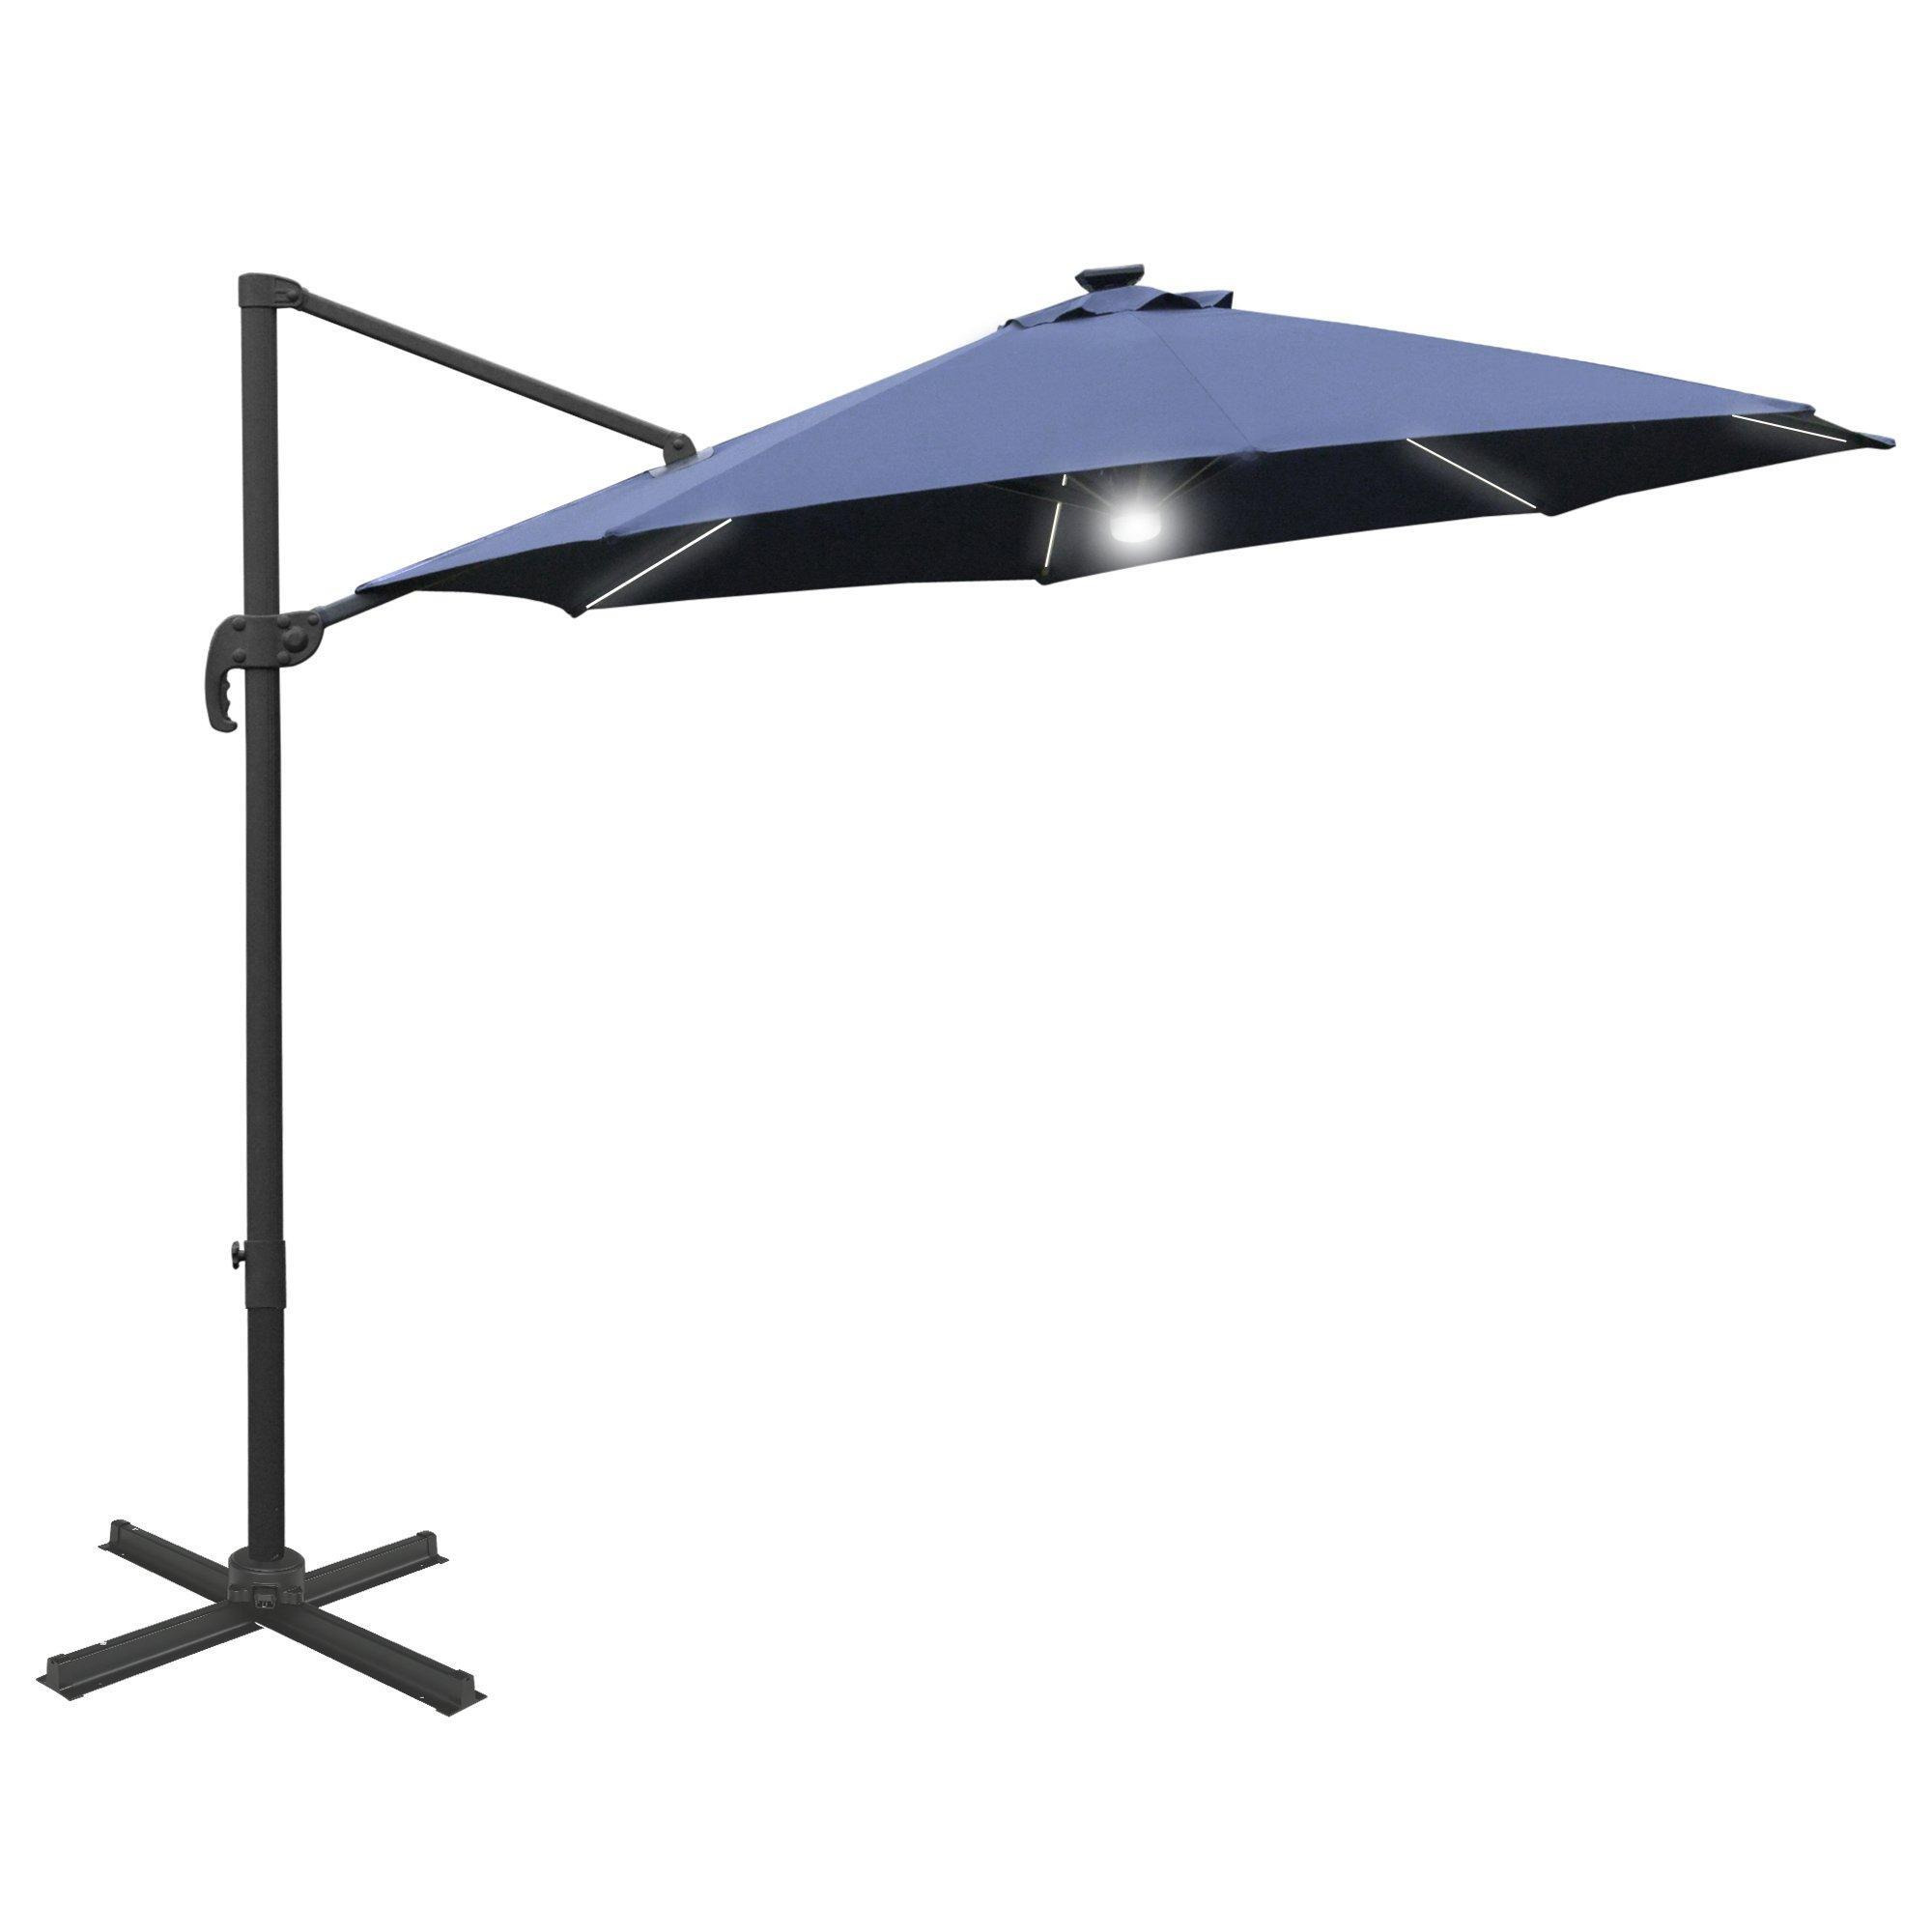 3Metre LED Cantilever Parasol Outdoor with Base Solar Lights - image 1